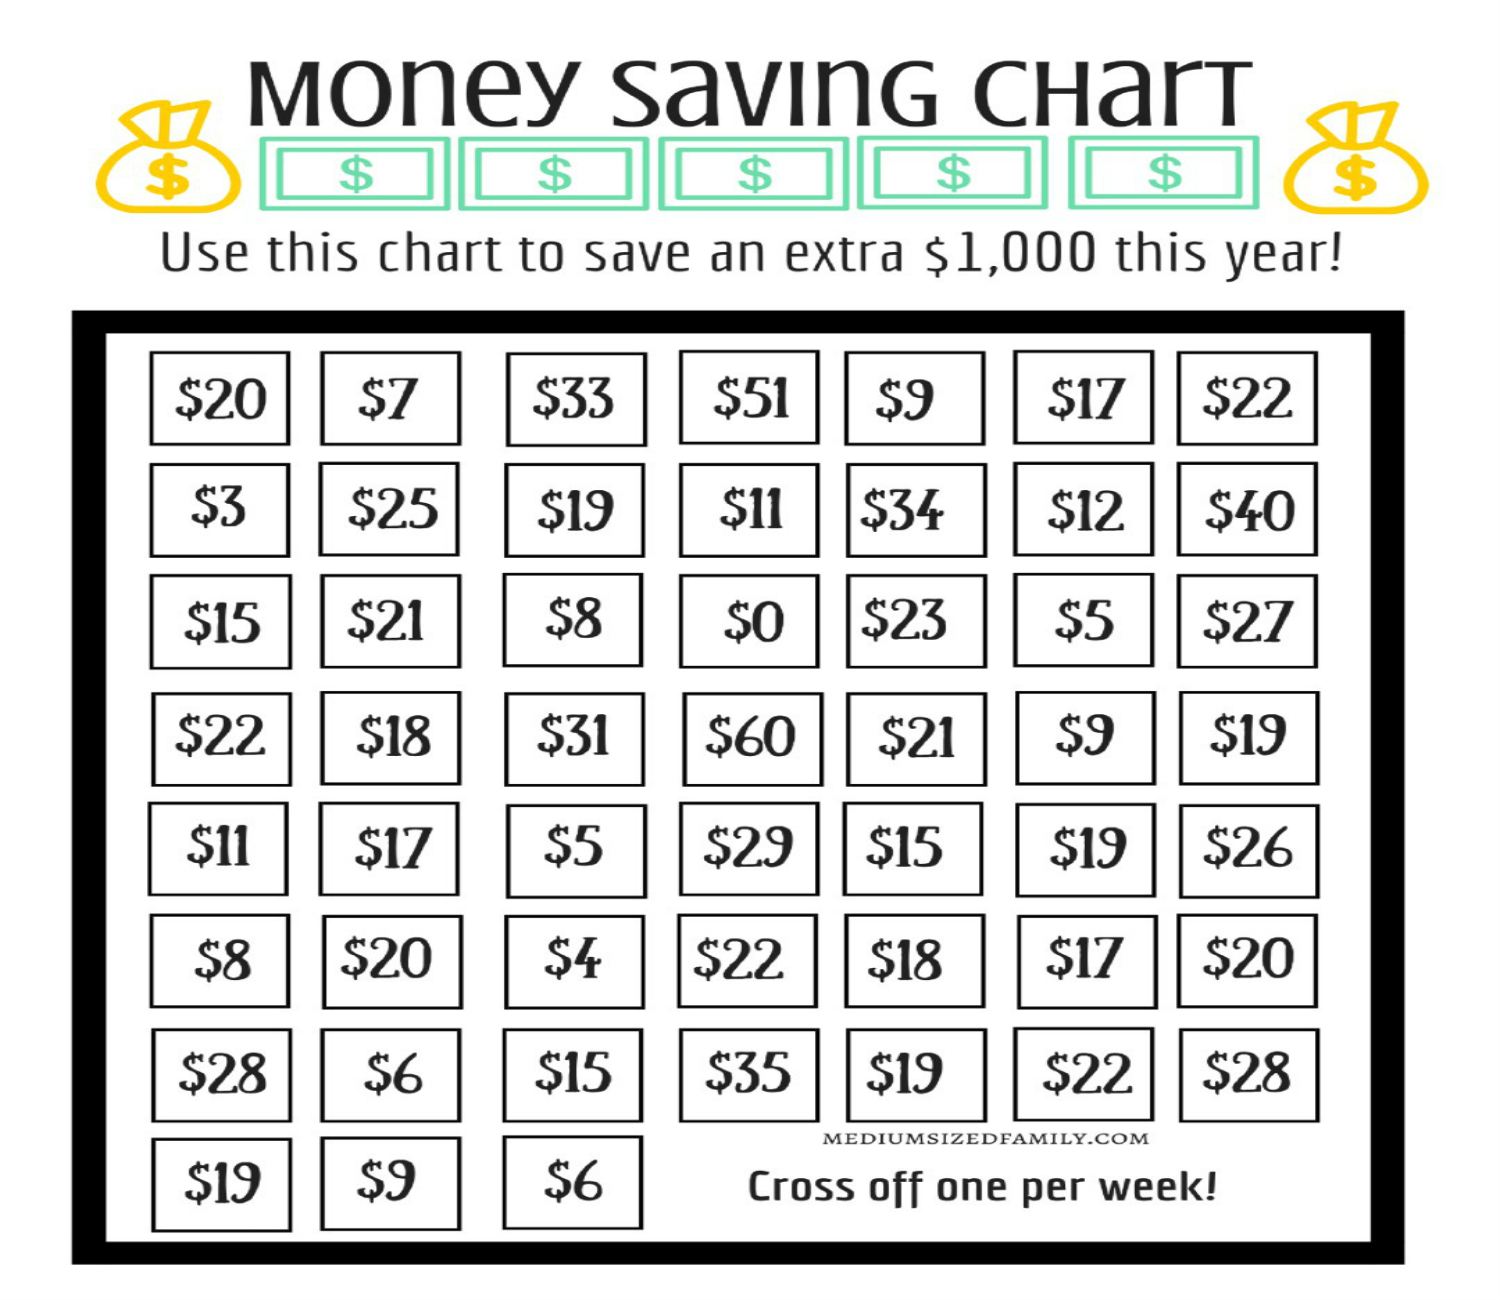 genius-chart-shows-the-easiest-way-to-save-1-000-in-one-year